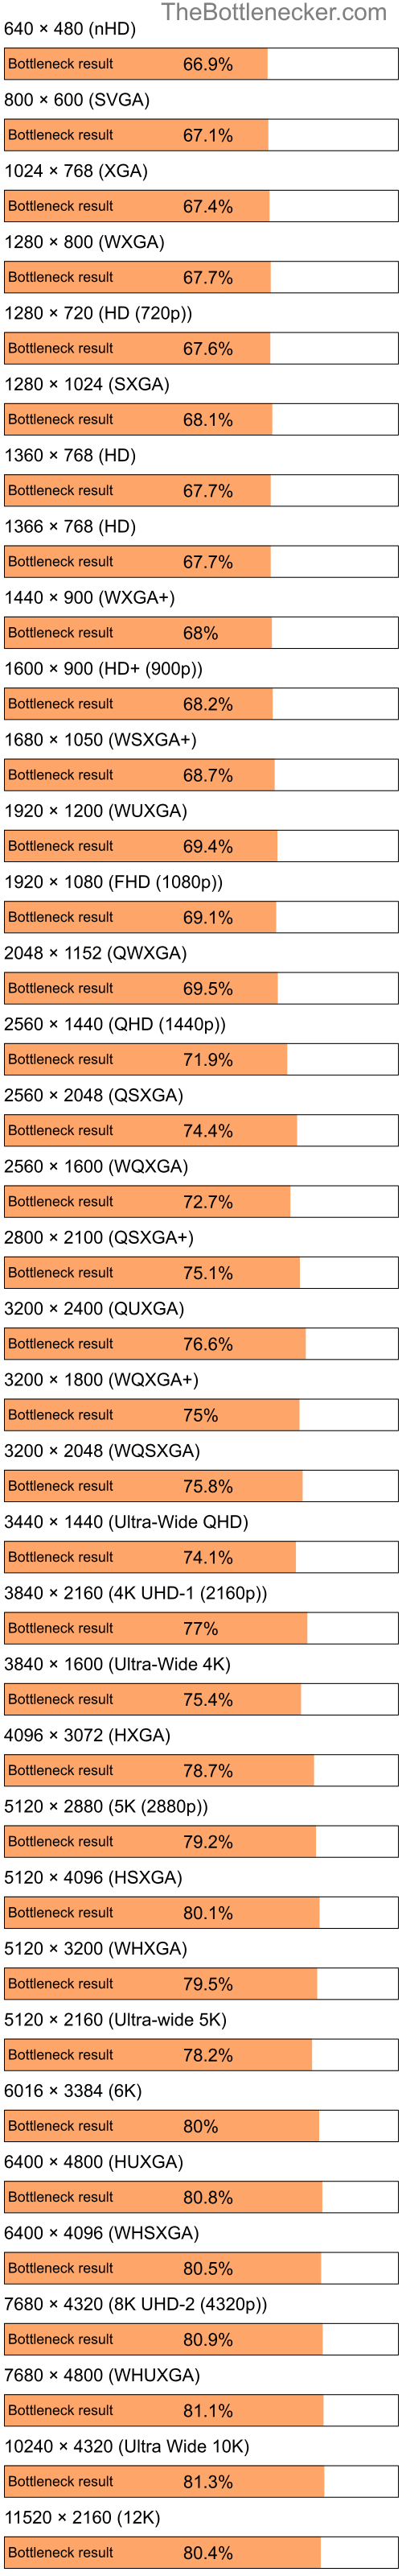 Bottleneck results by resolution for Intel Pentium 4 and NVIDIA GeForce 7300 LE in General Tasks